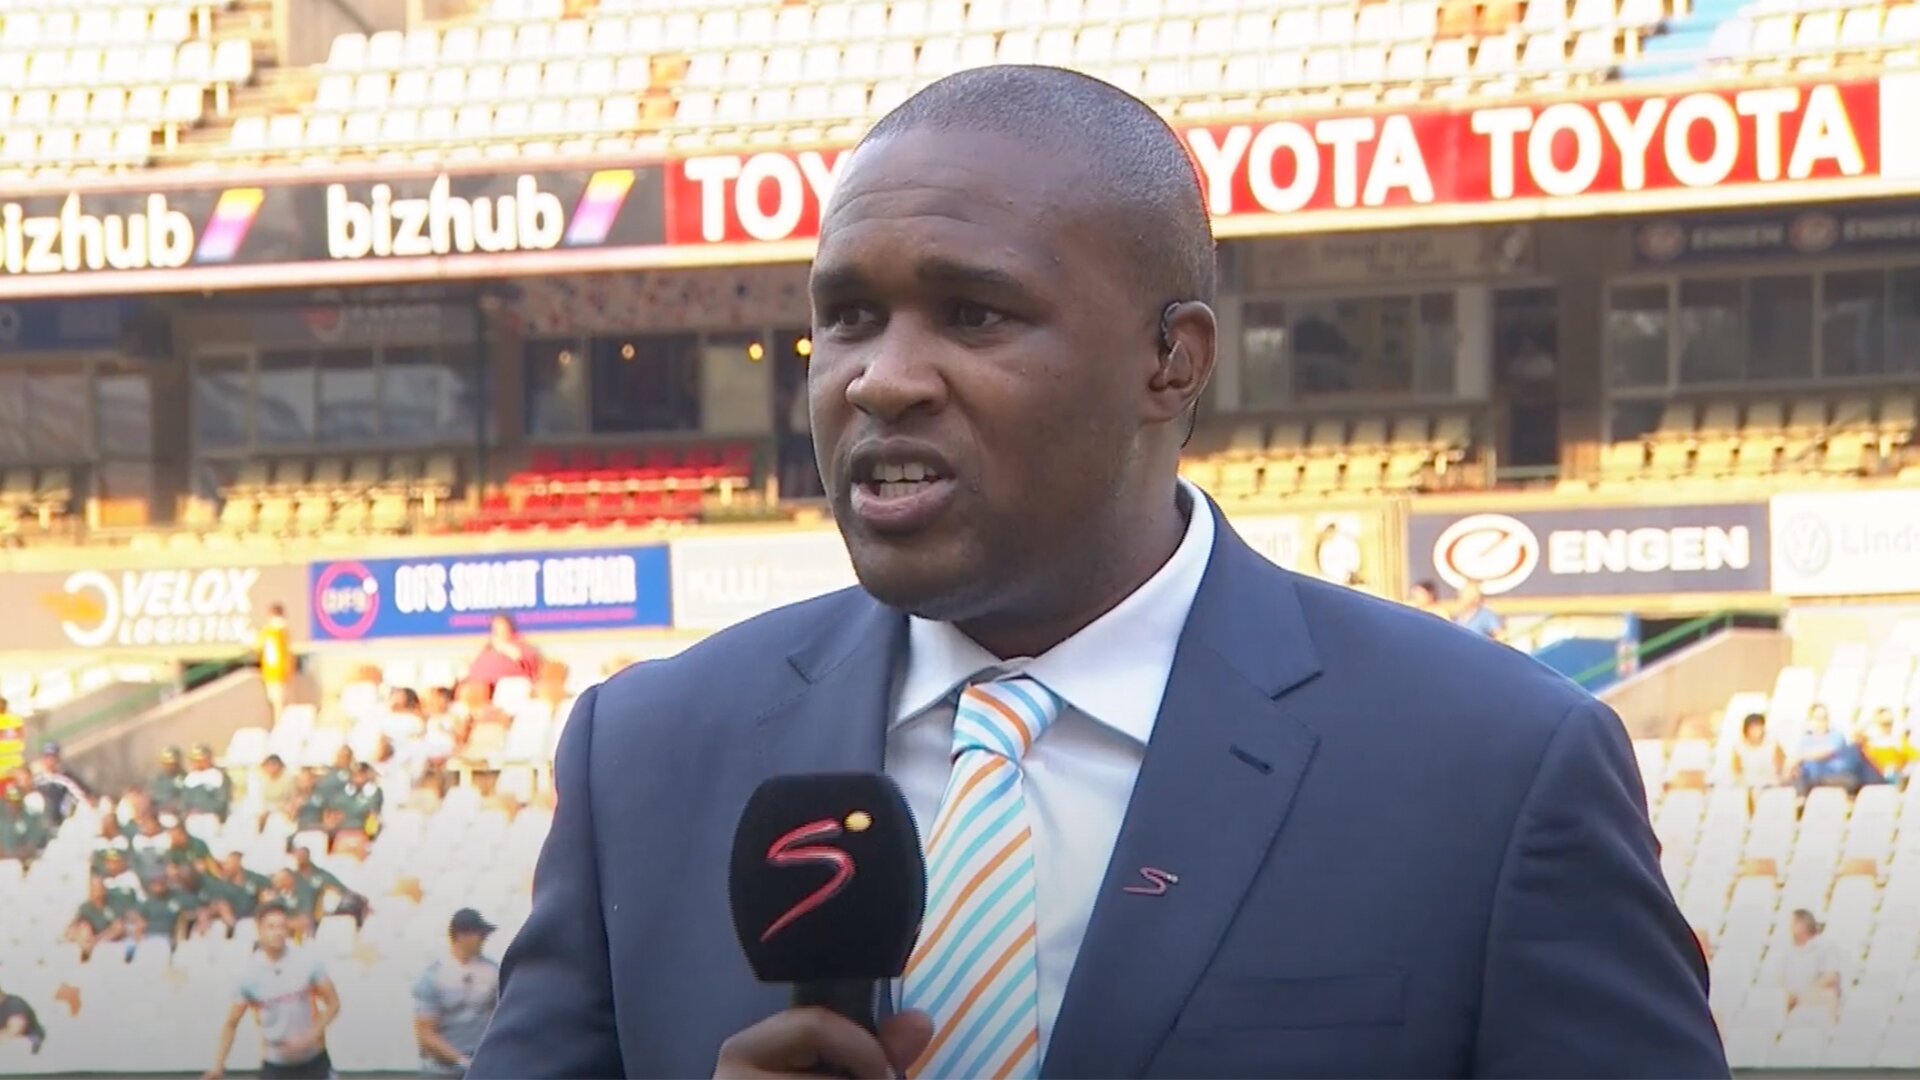 One of the World's best Springbok rugby commentators loses battle with COVID-19